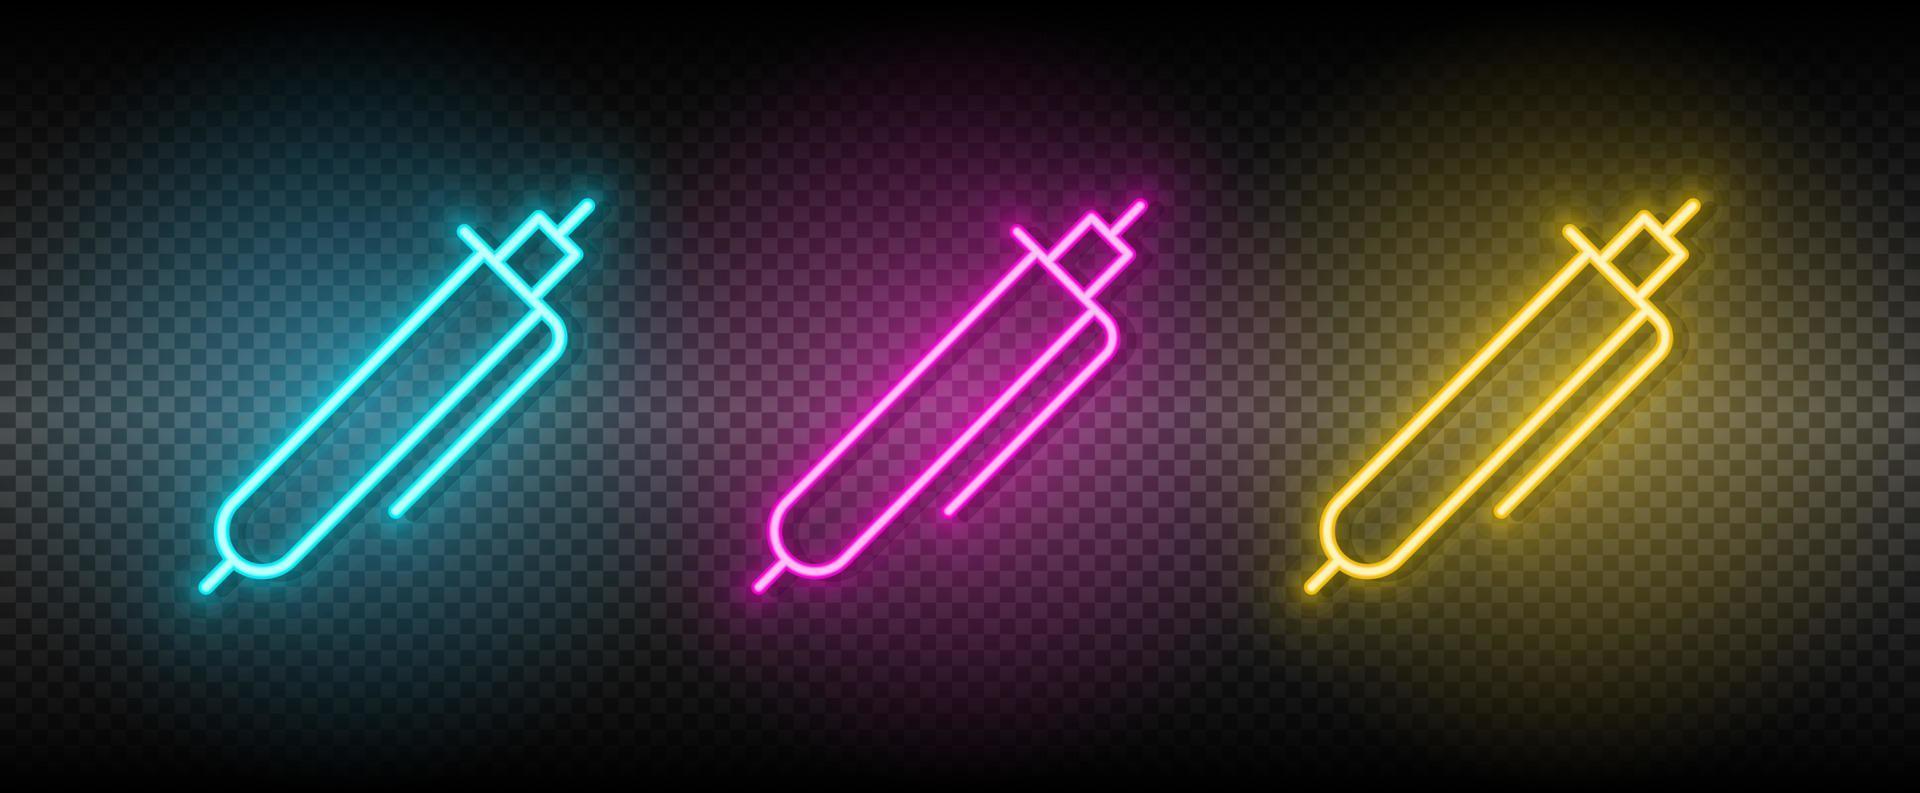 pen vector icon yellow, pink, blue neon set. Tools vector icon on dark transparency background